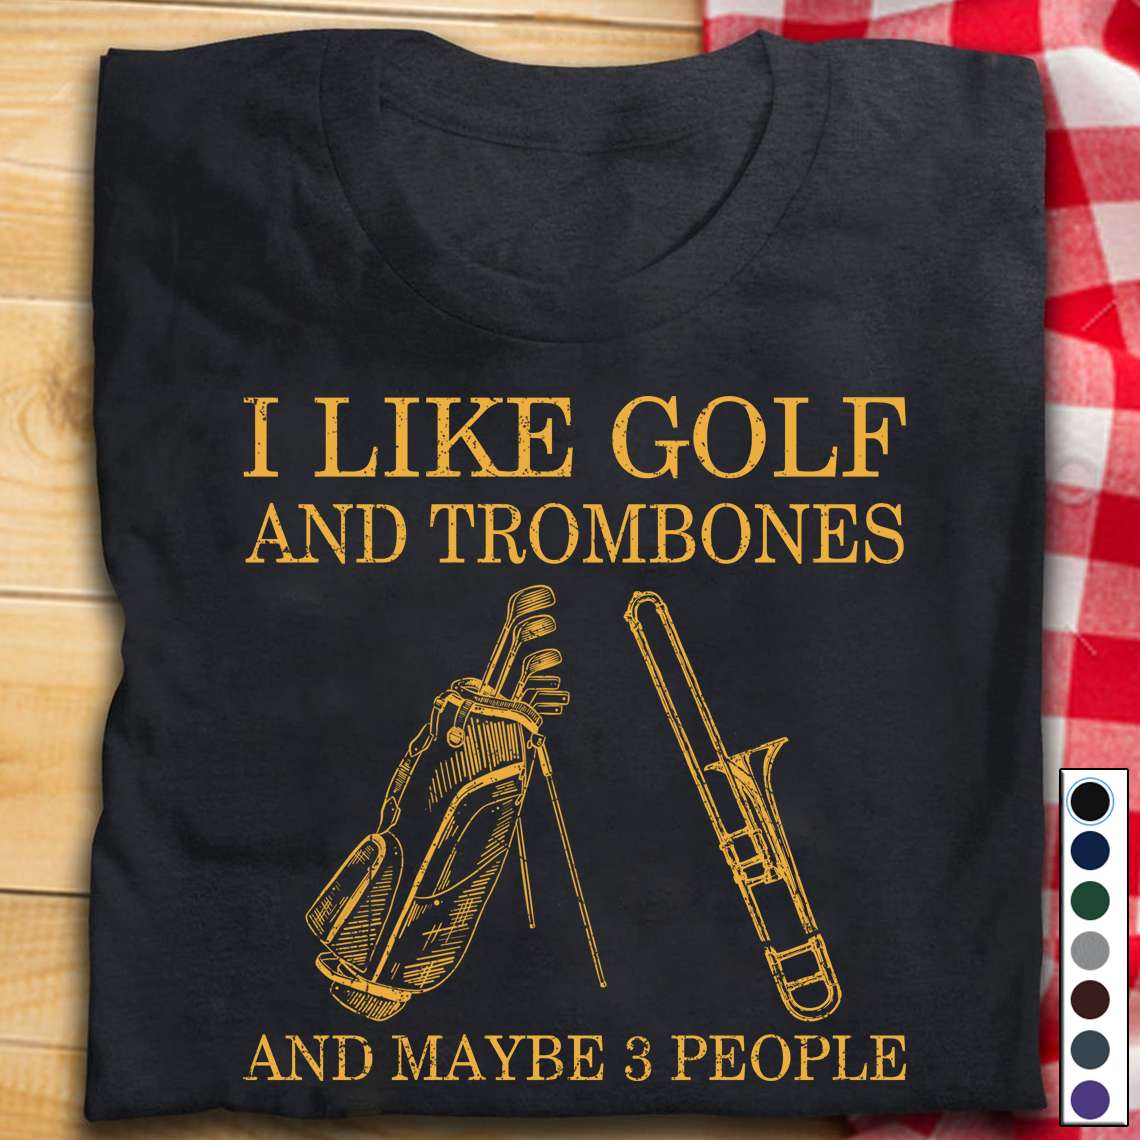 I like golf and trombones and maybe 3 people - Trombones the instrument